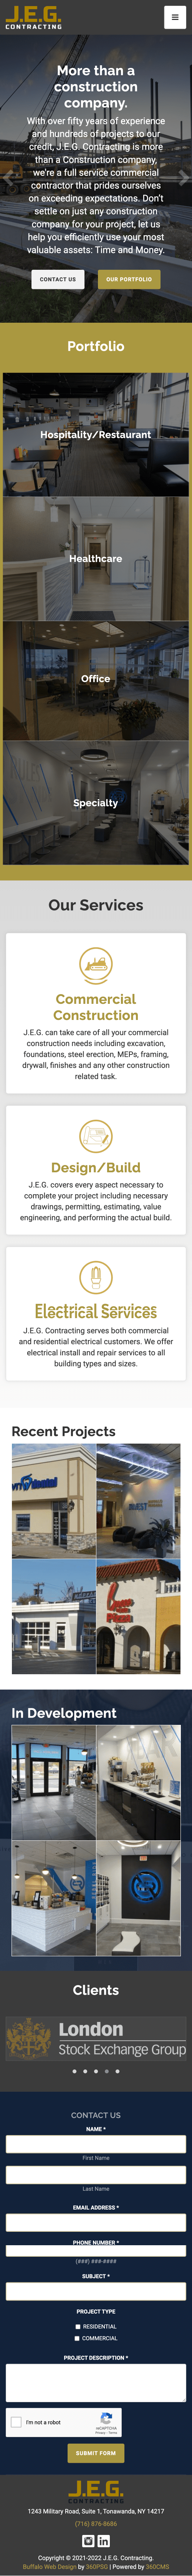 J.E.G. Contracting Website - Mobile